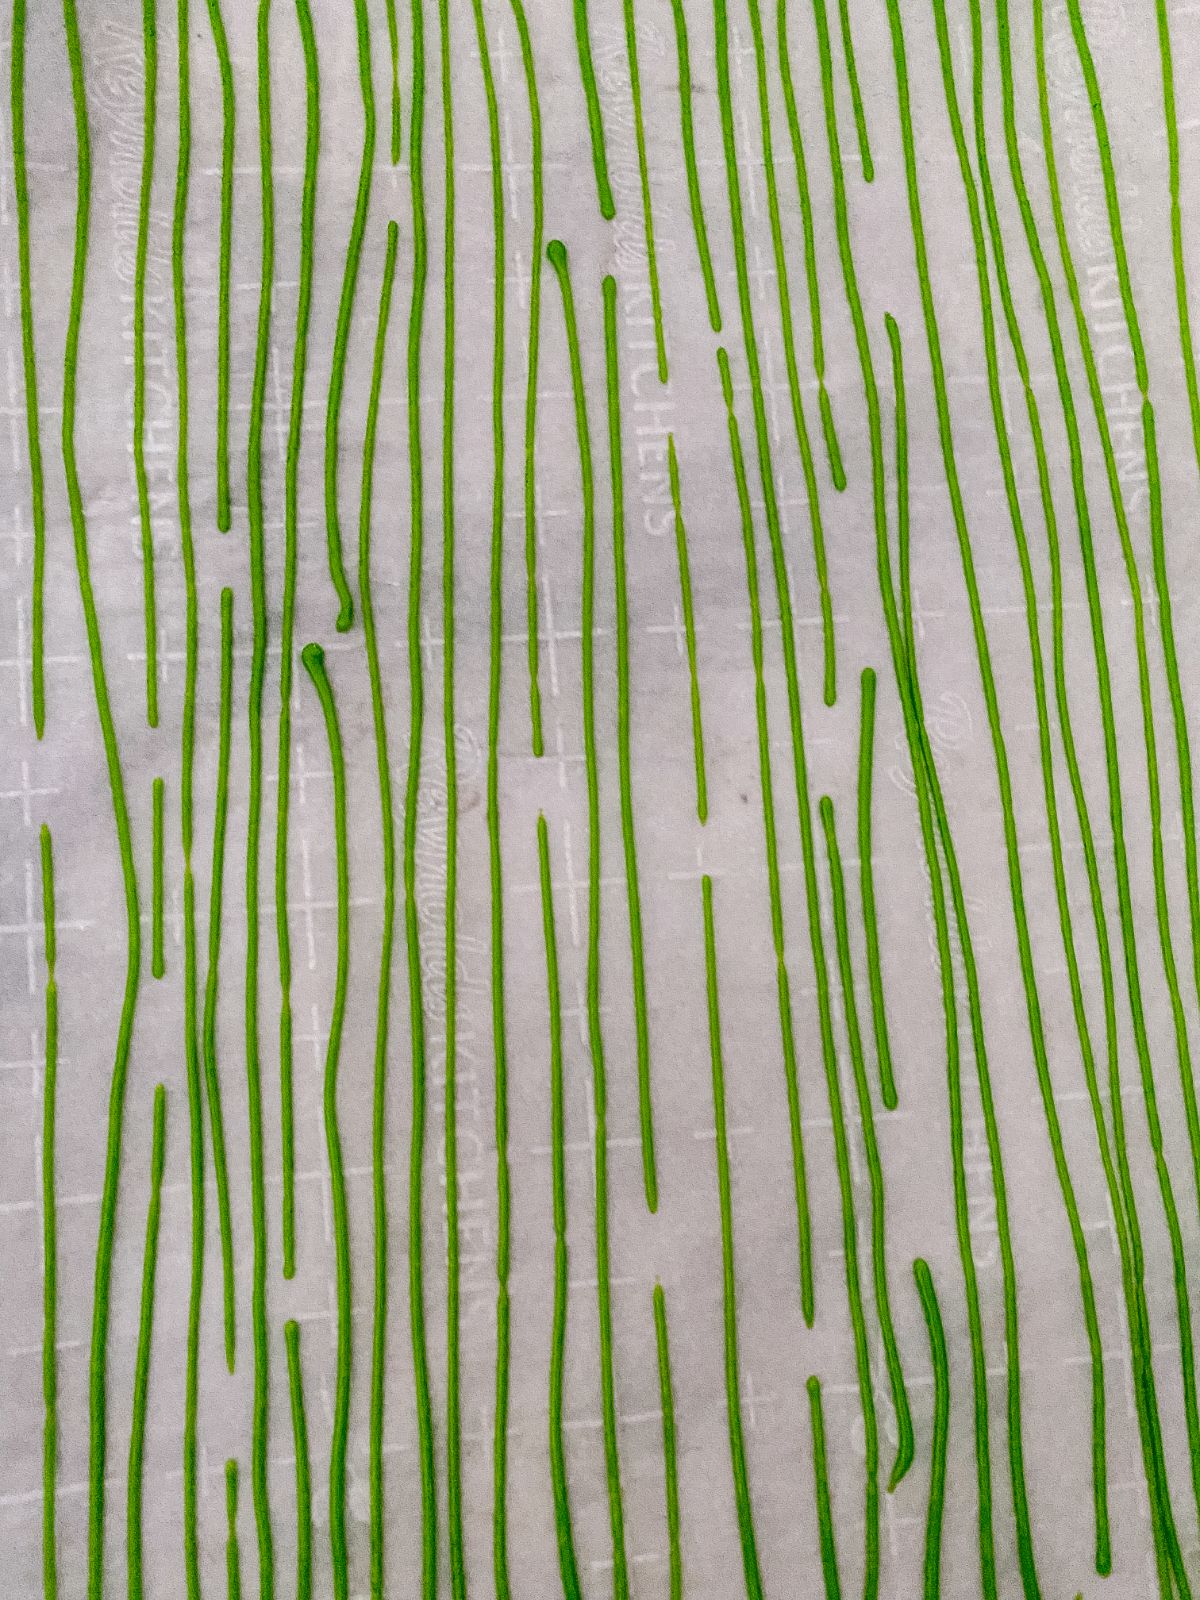 strips of green sprinkles on parchment paper